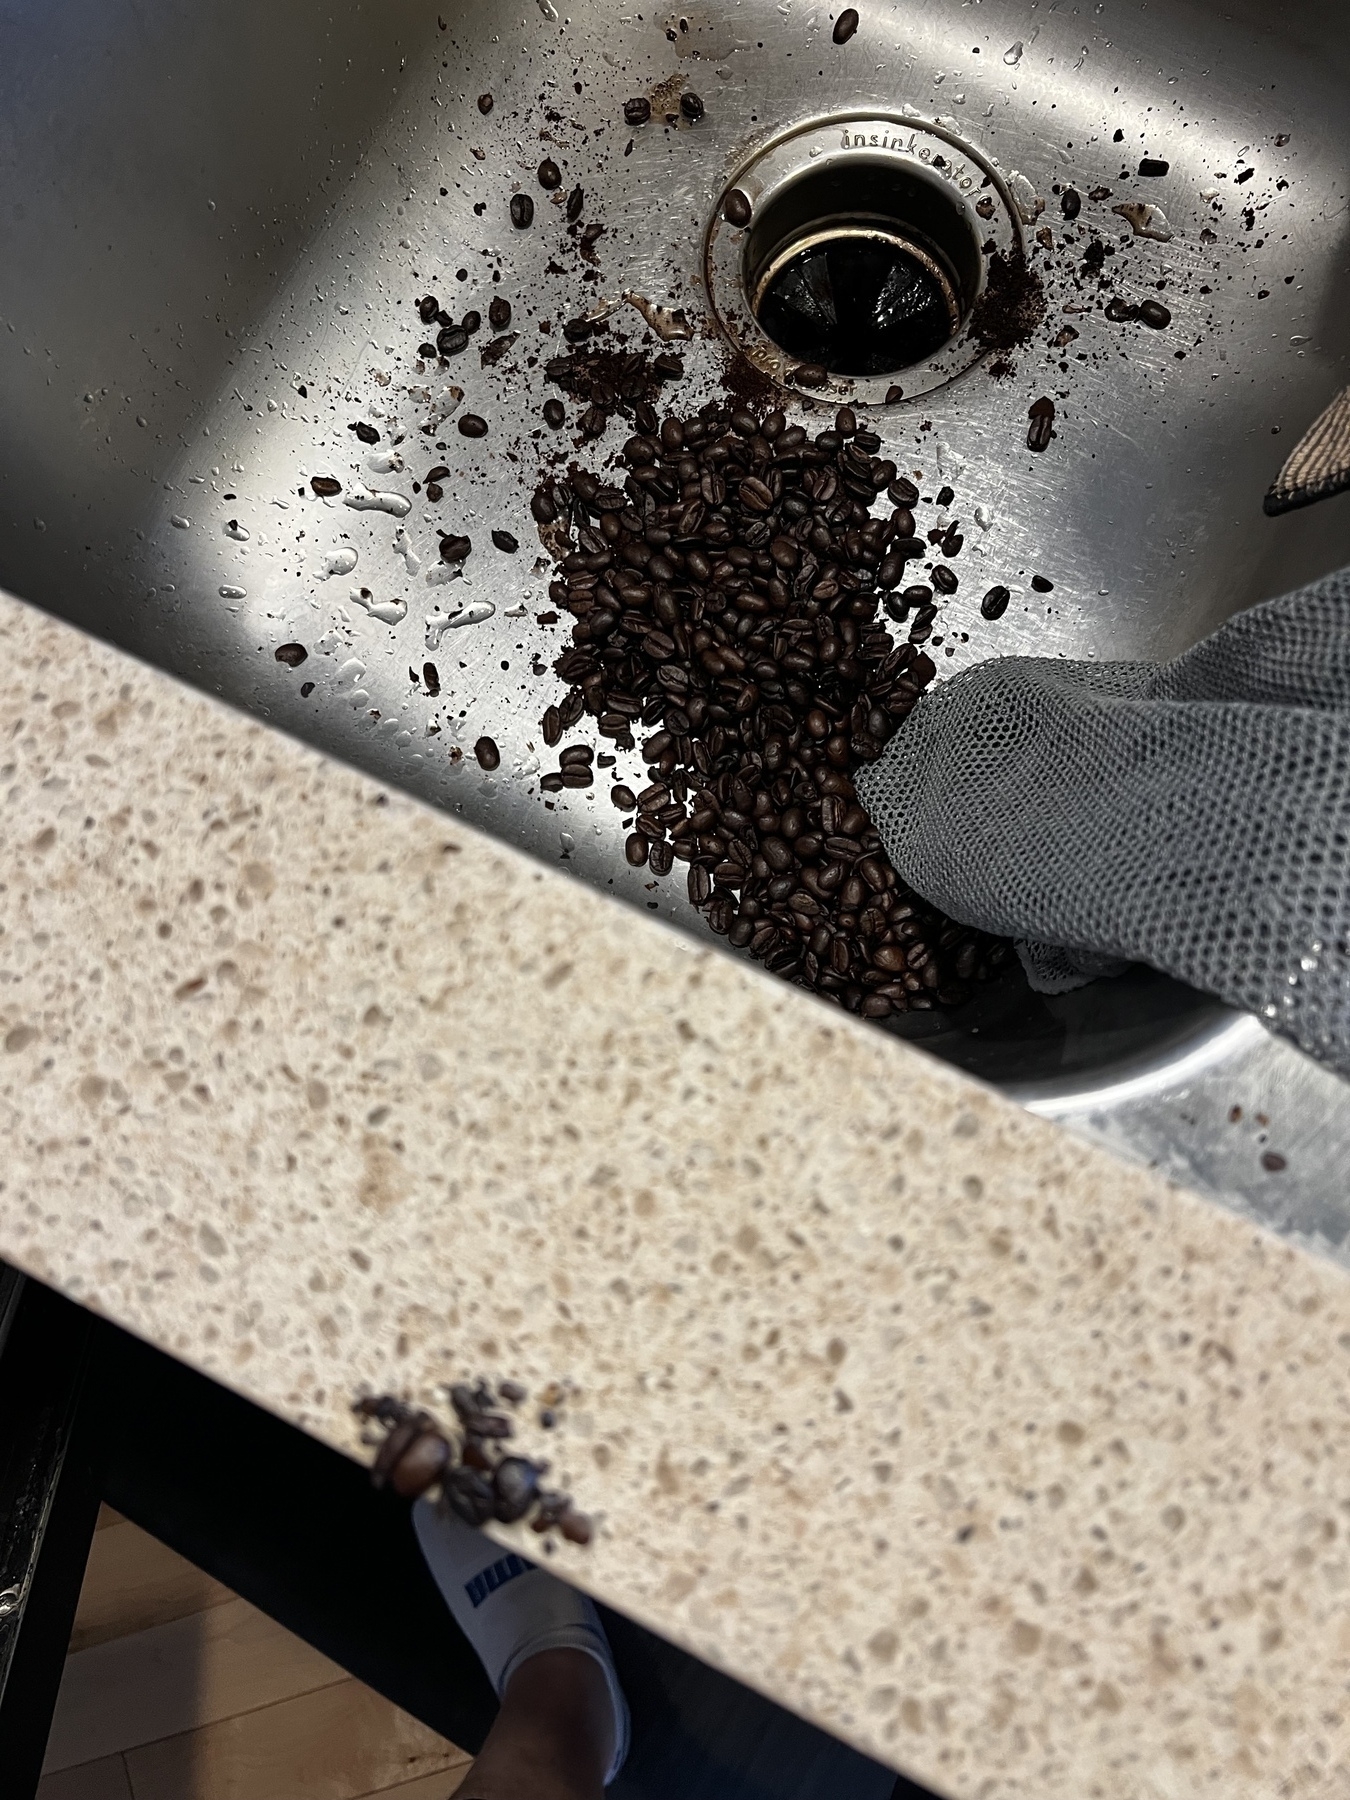 Coffee beans spilled in the sink